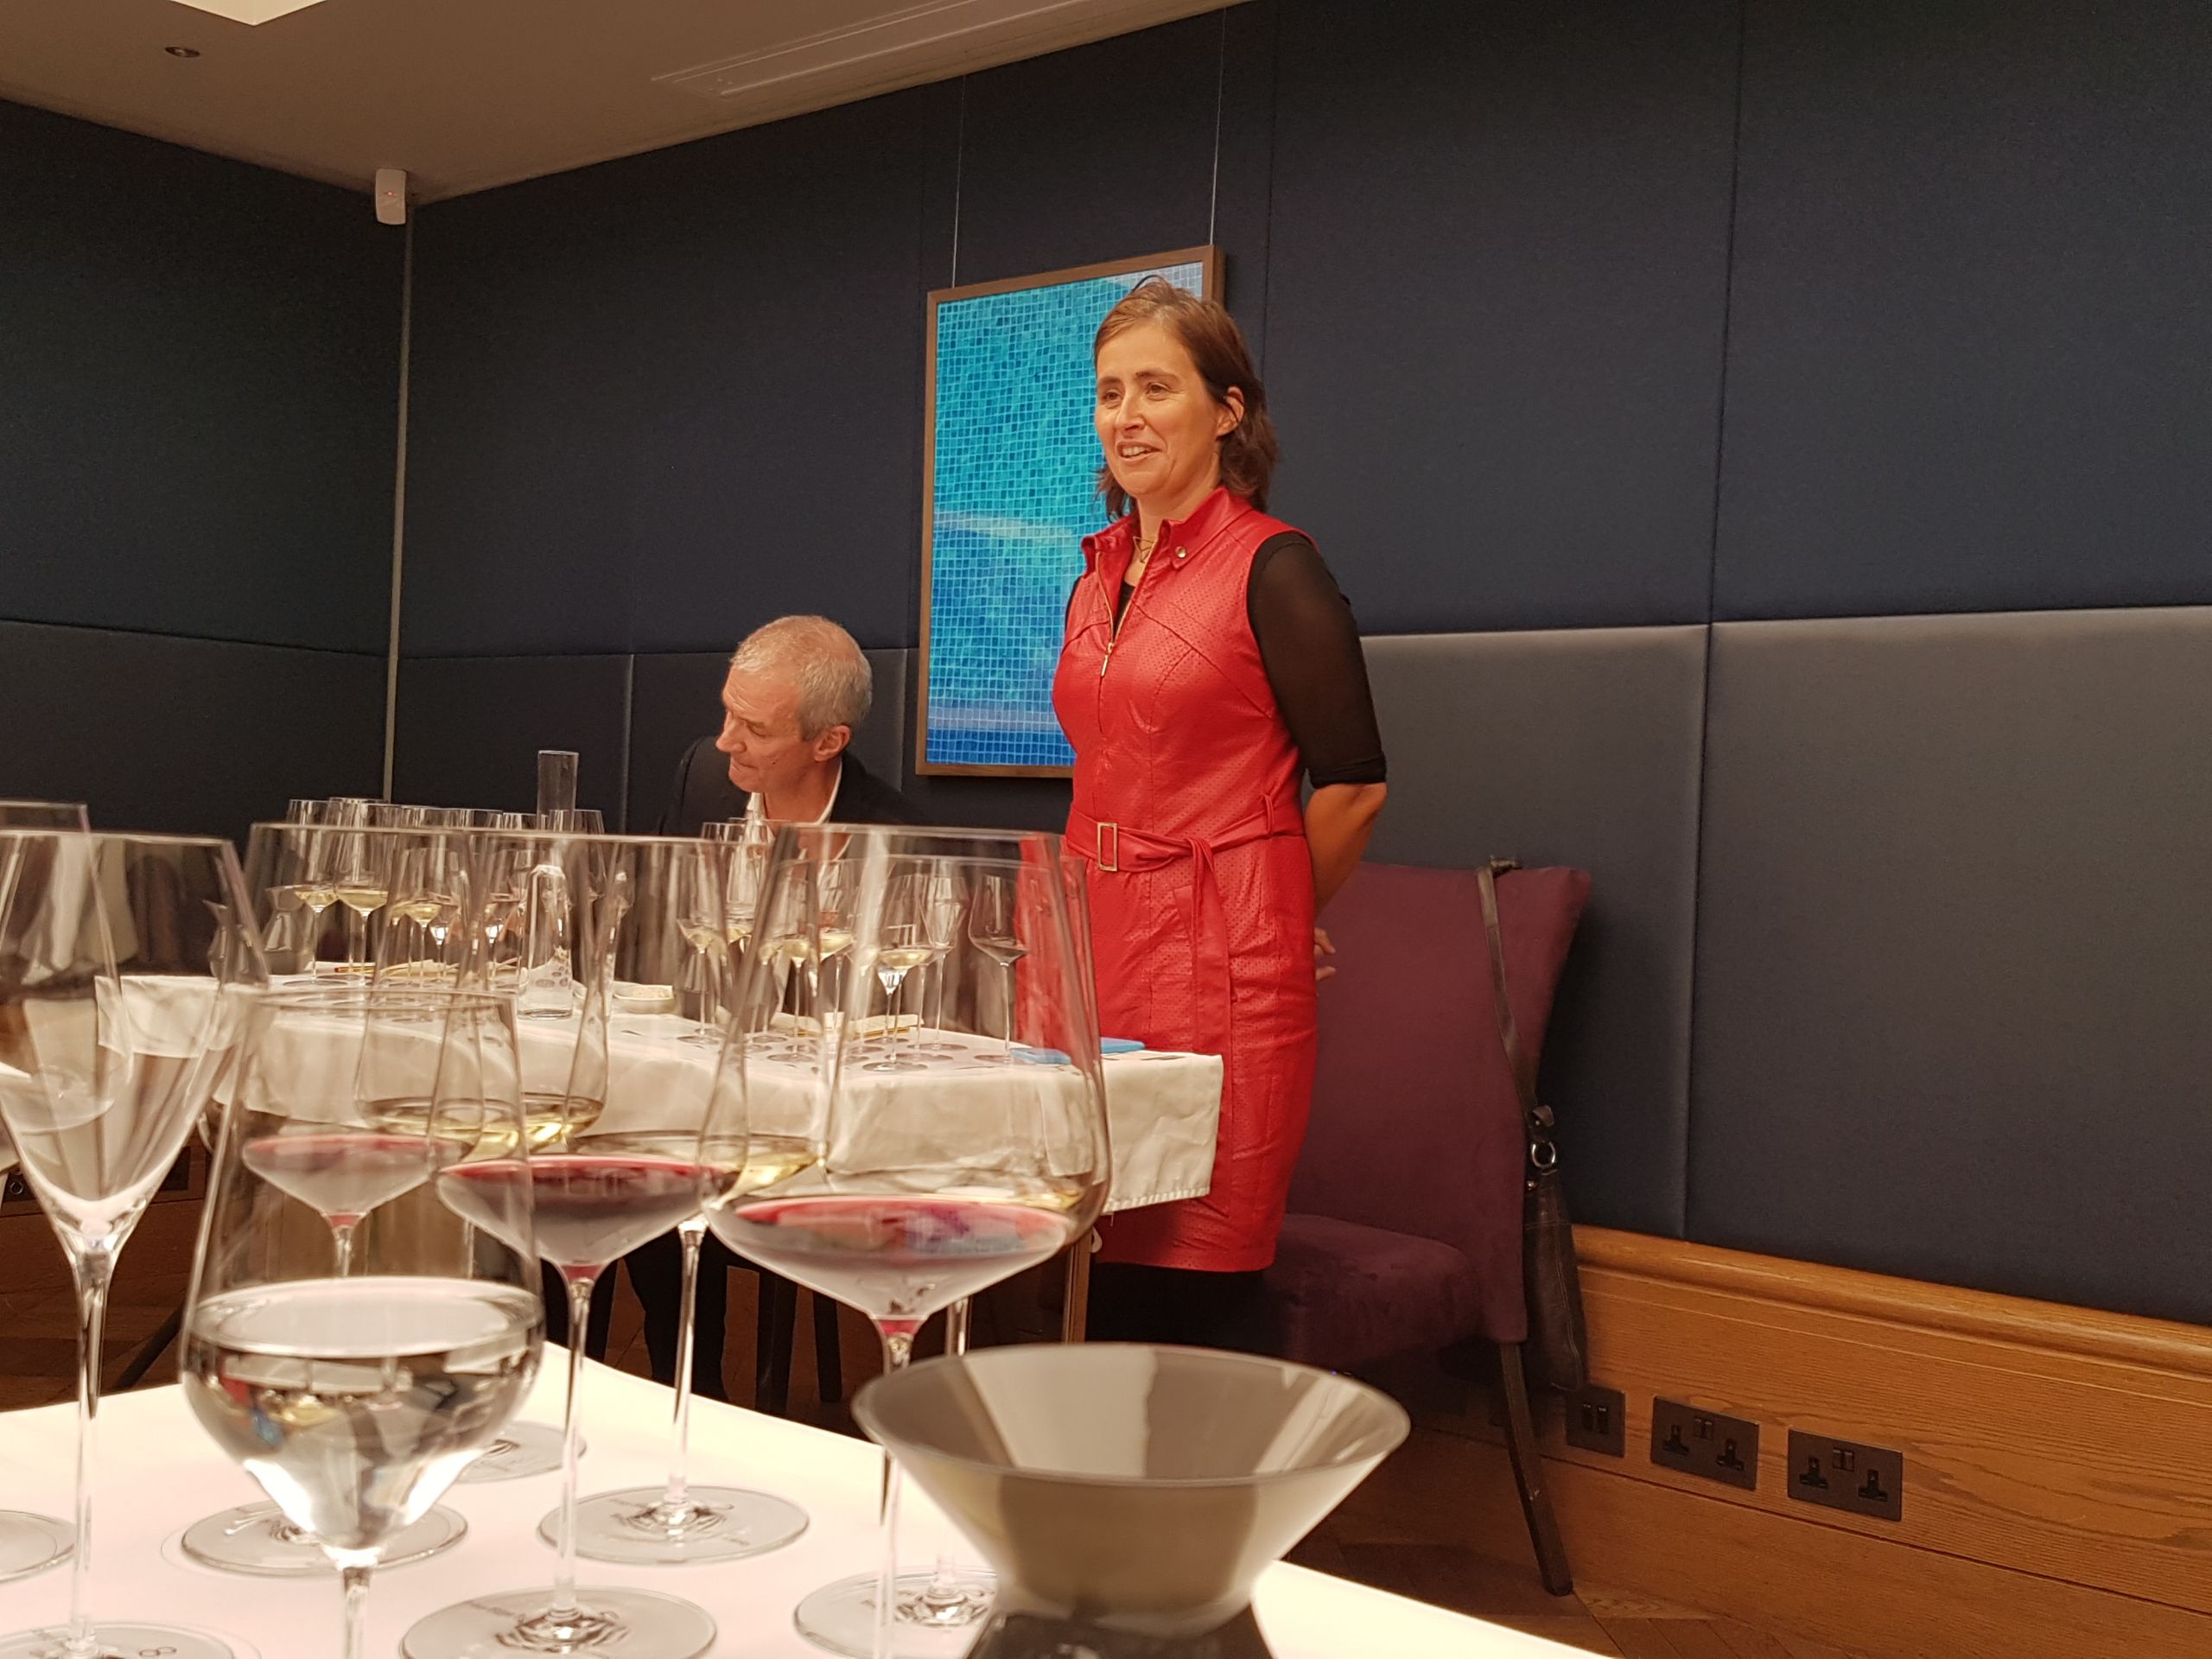 Filipa Pato giving a talk in London, tasting glasses in the foreground